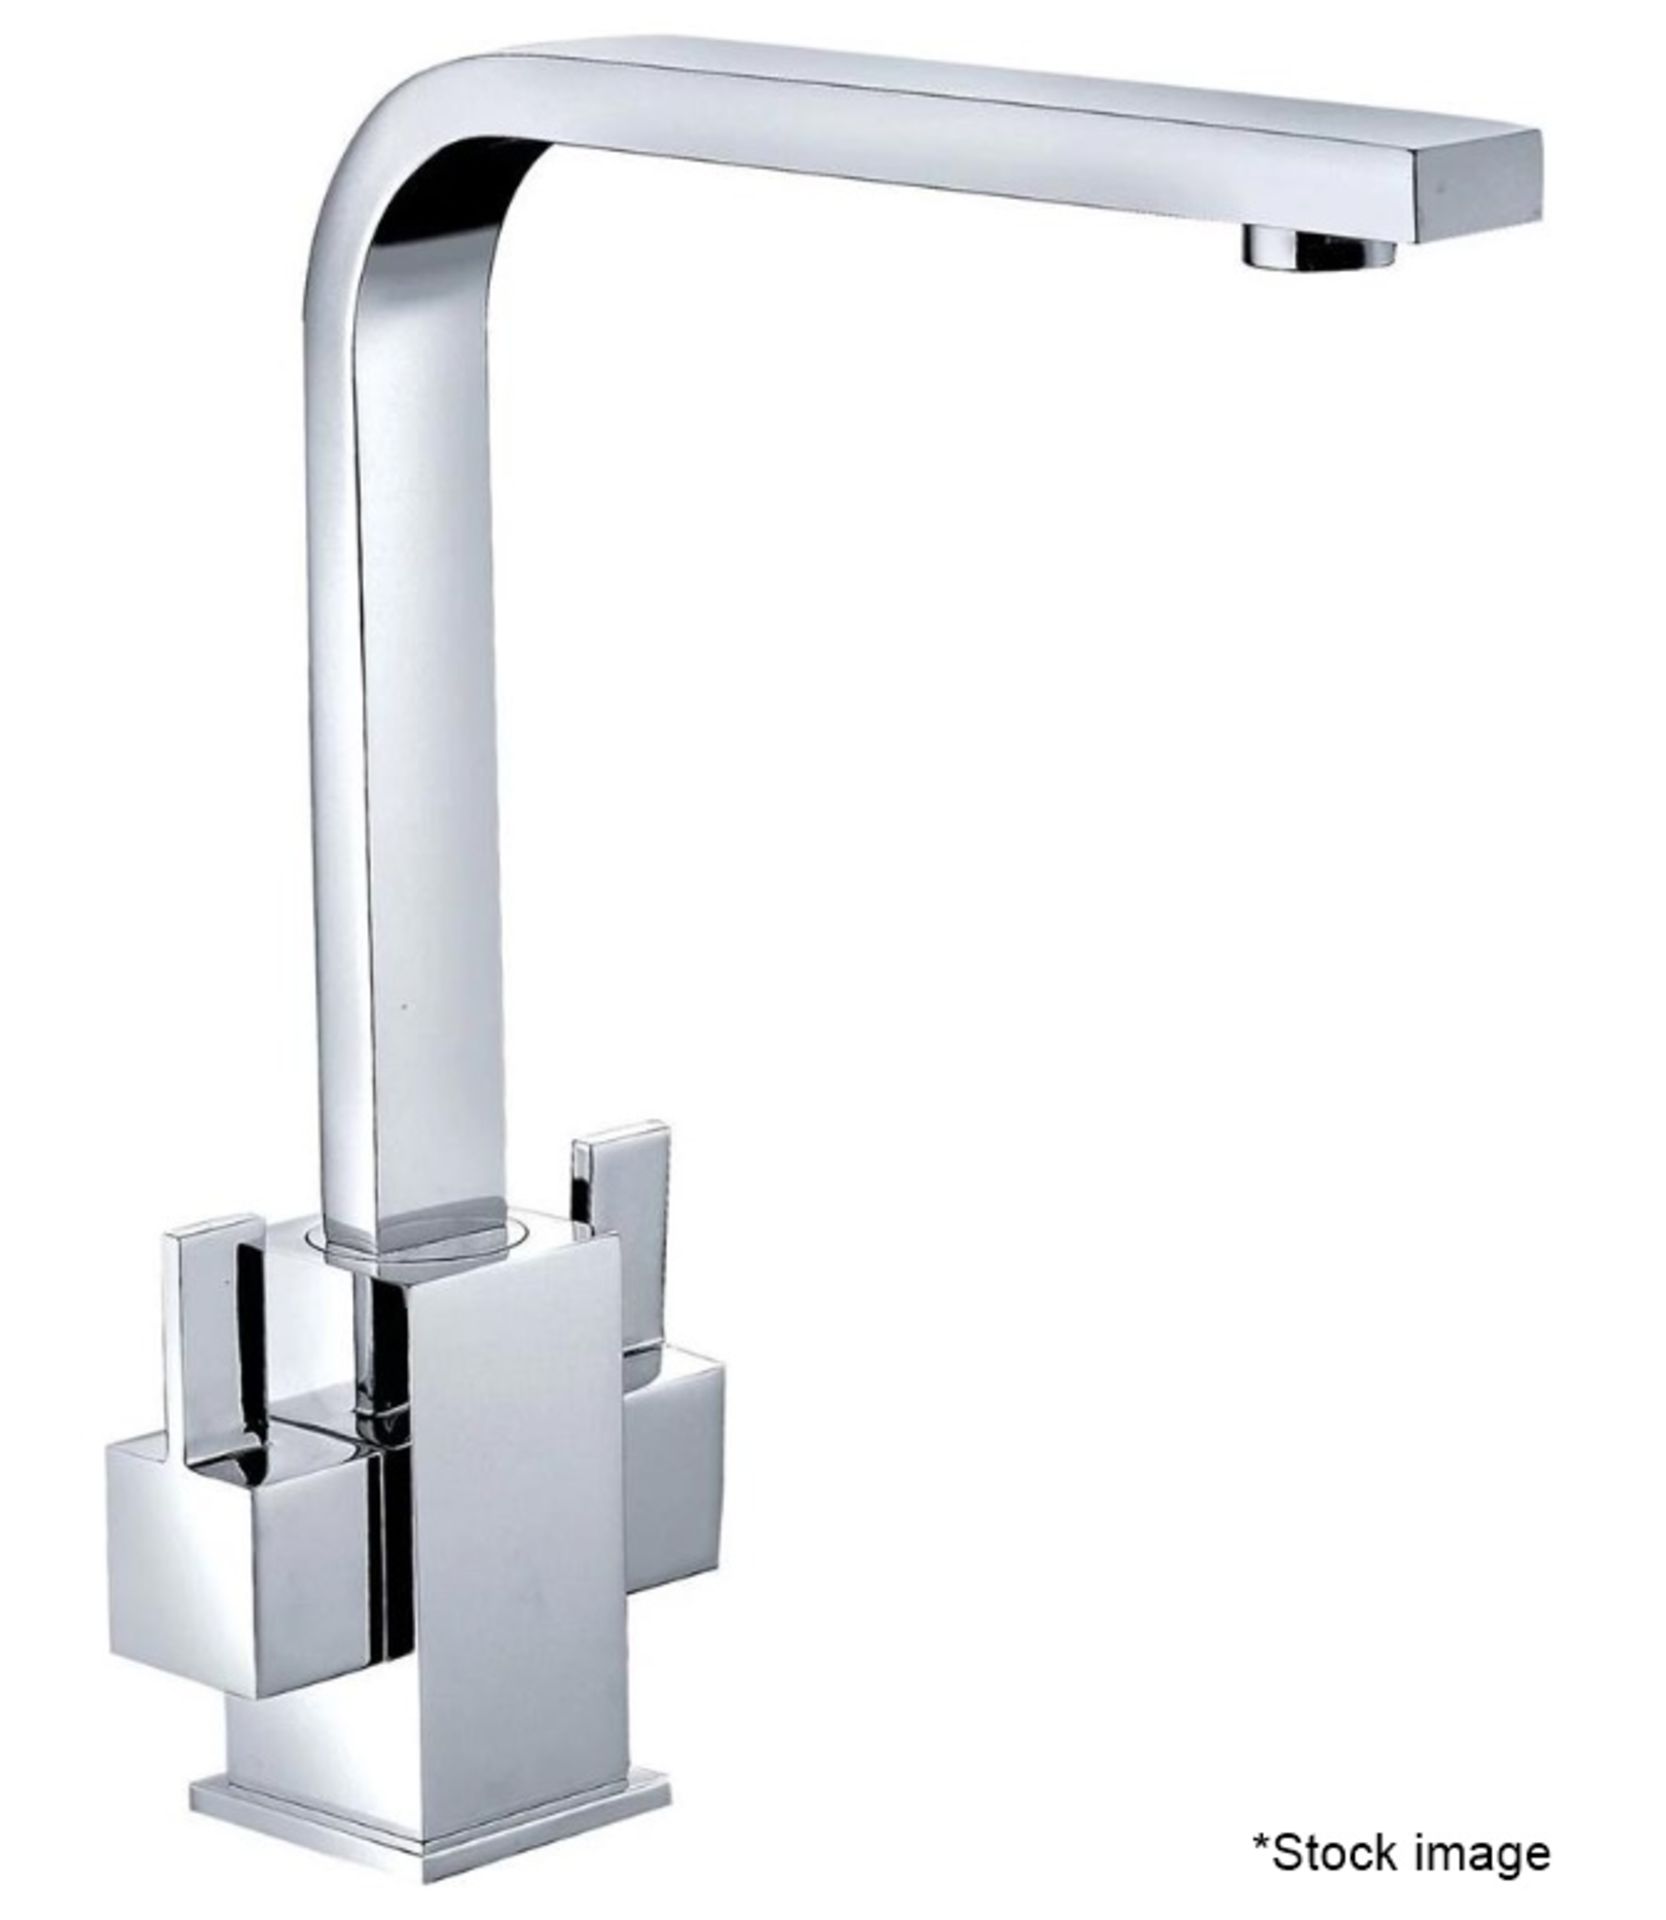 1 x CASSELLIE Square Dual Lever Mono Kitchen Sink Mixer Tap In Chrome - Ref: KTA015 - New & Boxed